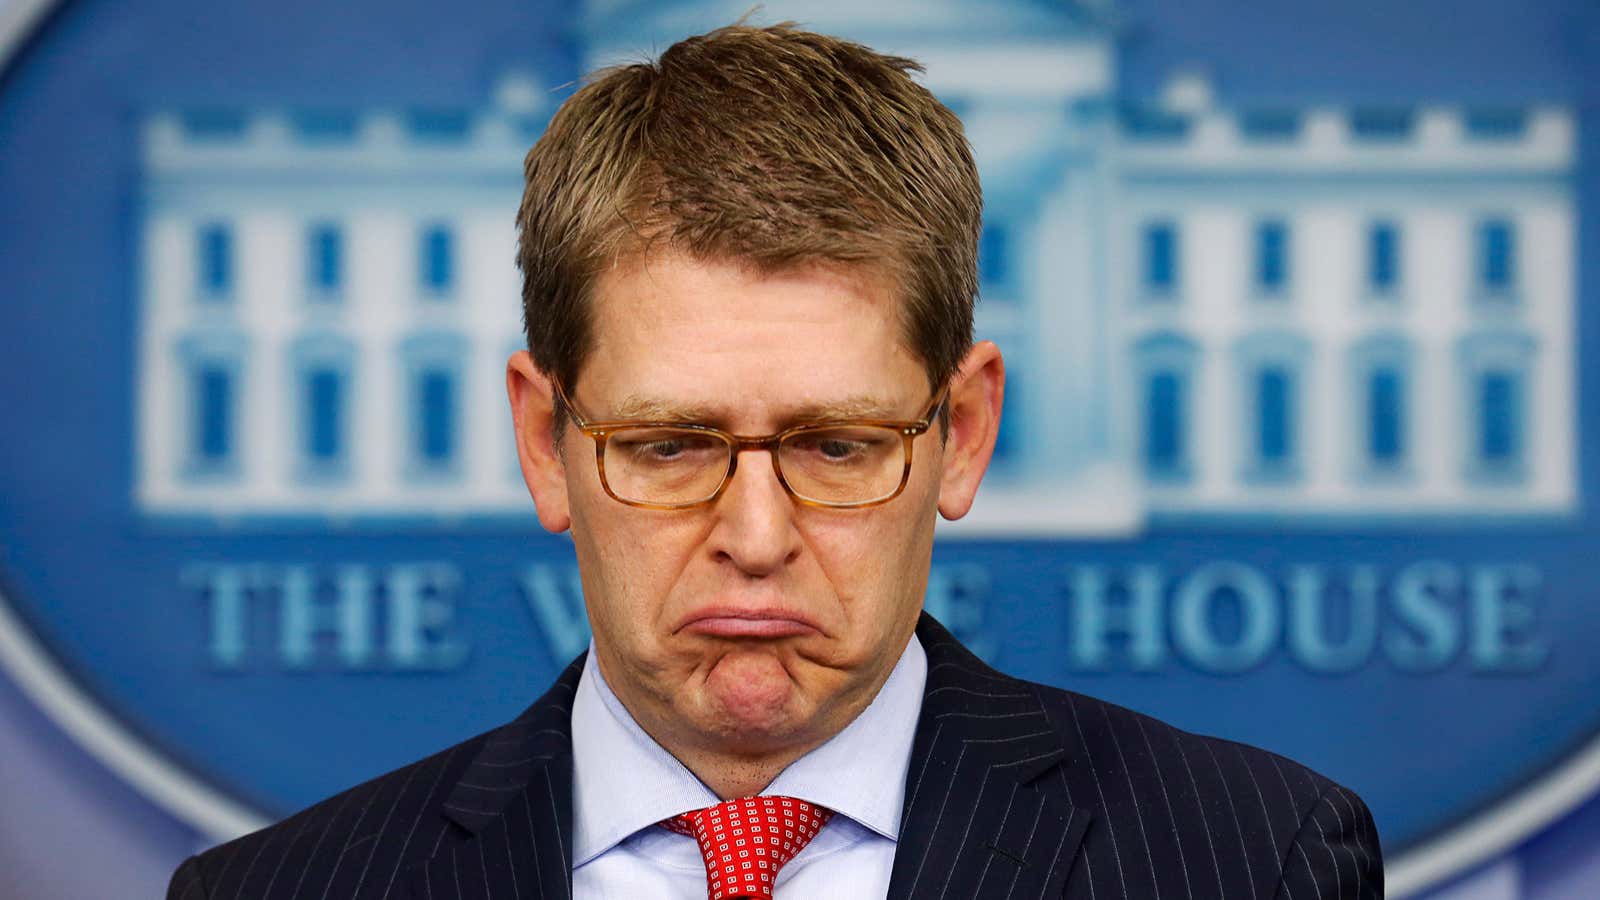 White House Press Secretary Jay Carney contemplates whether or not his job is essential.